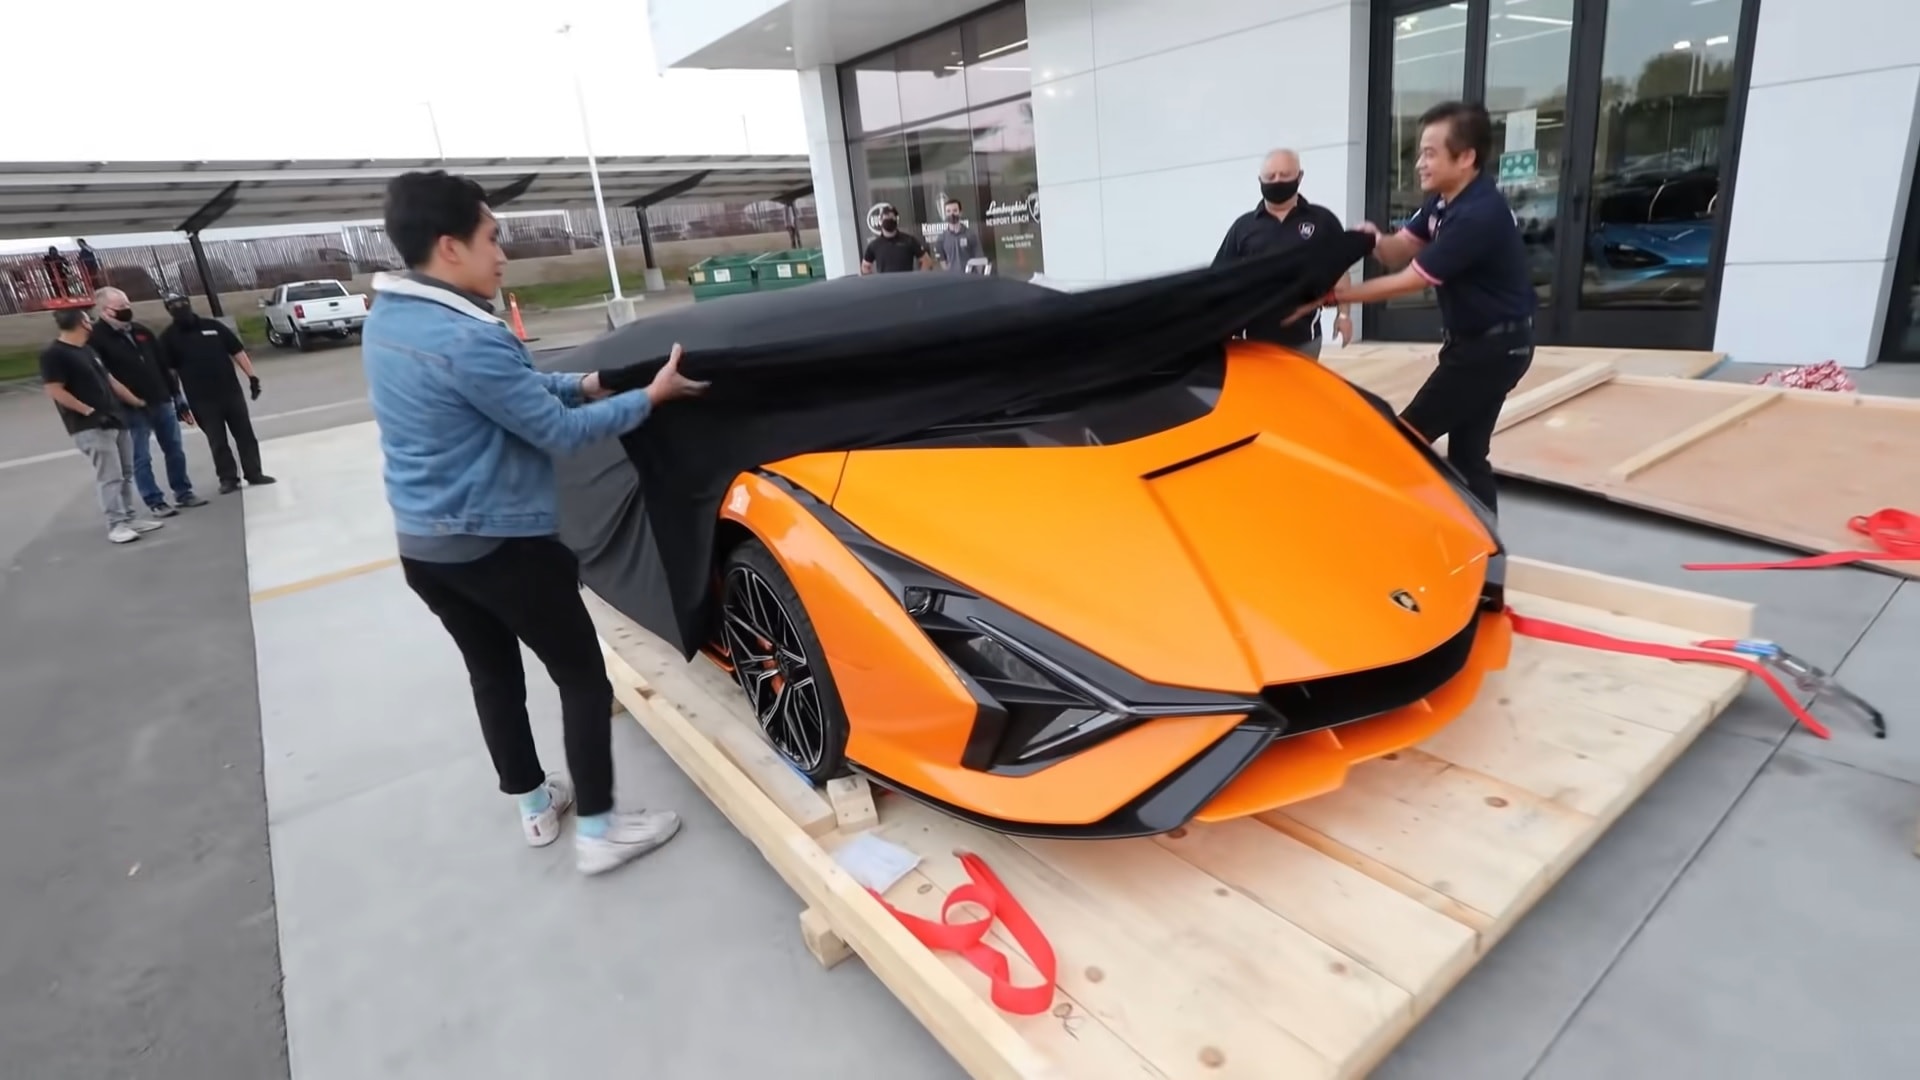 2020 Lamborghini Sian is the most powerful Lambo ever: photos, specs and  design details